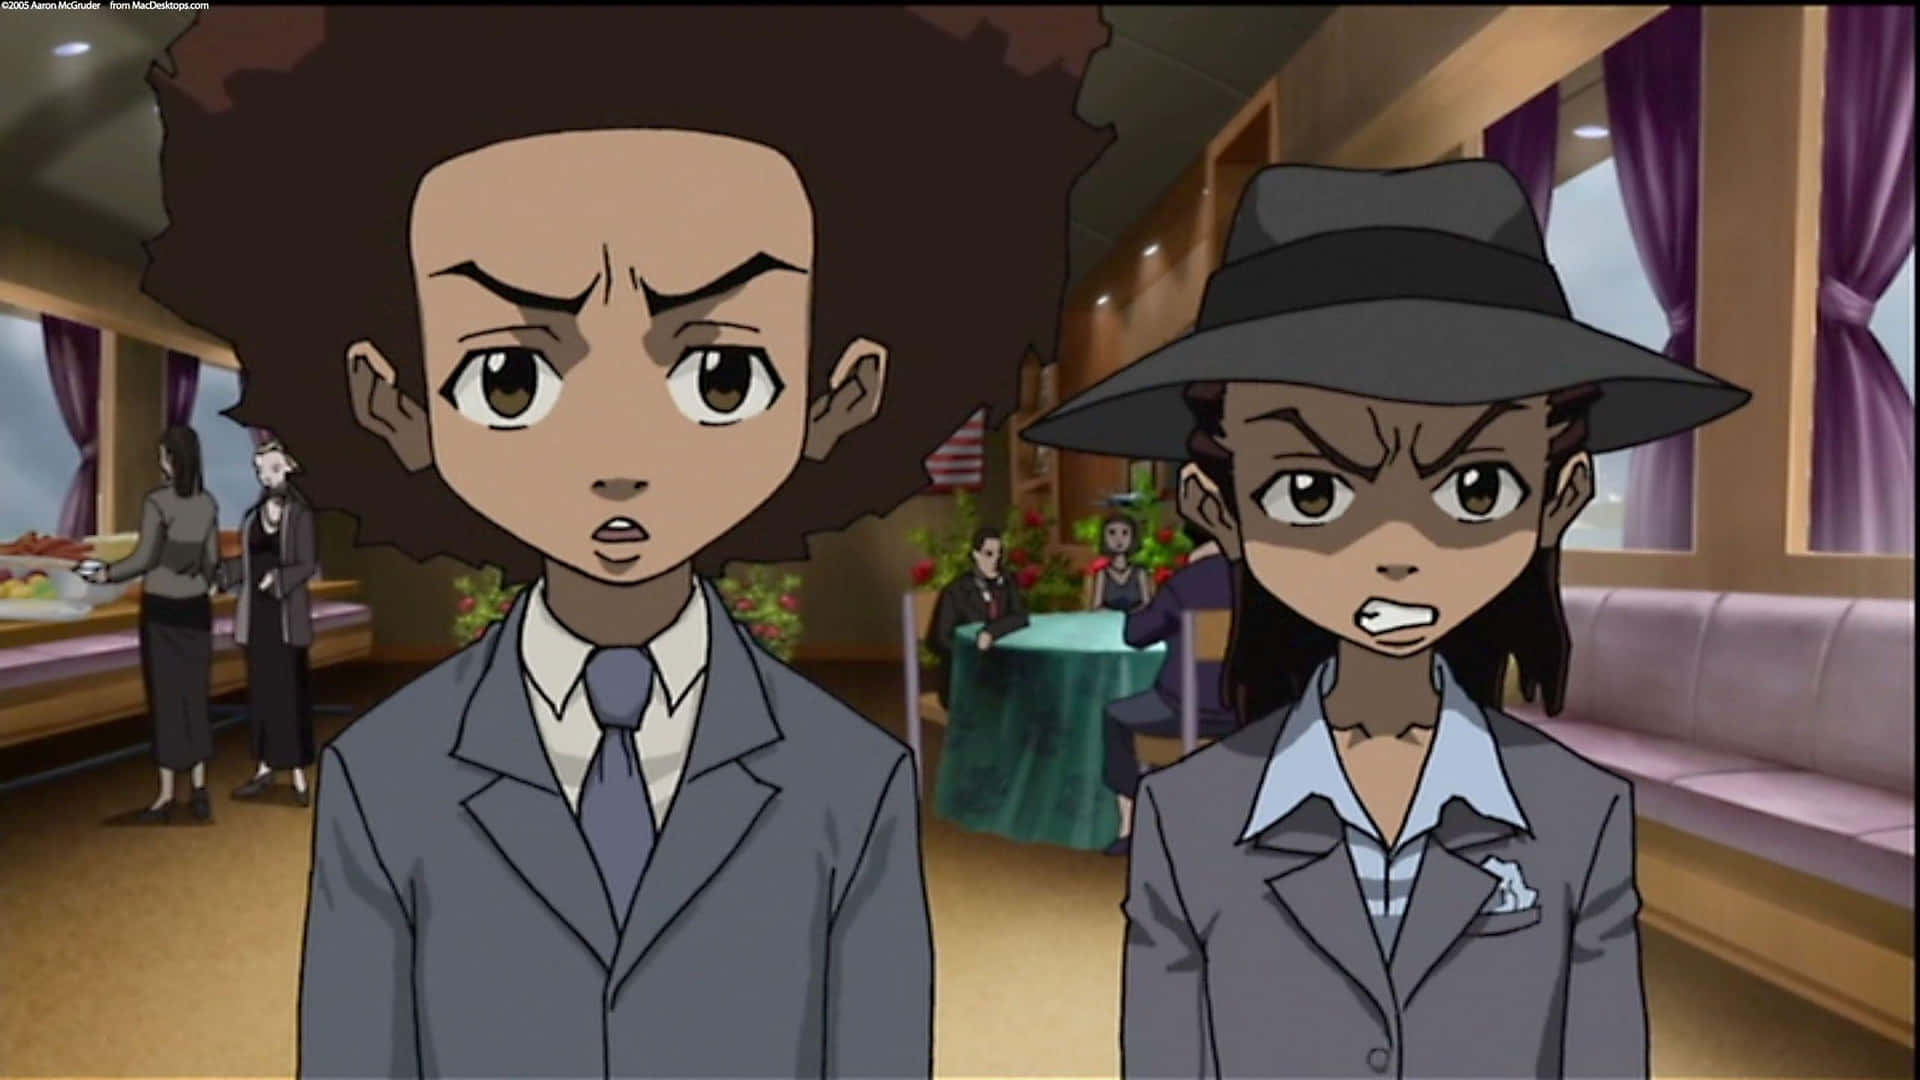 Get ready for the craziest adventures with the Boondocks Gang!